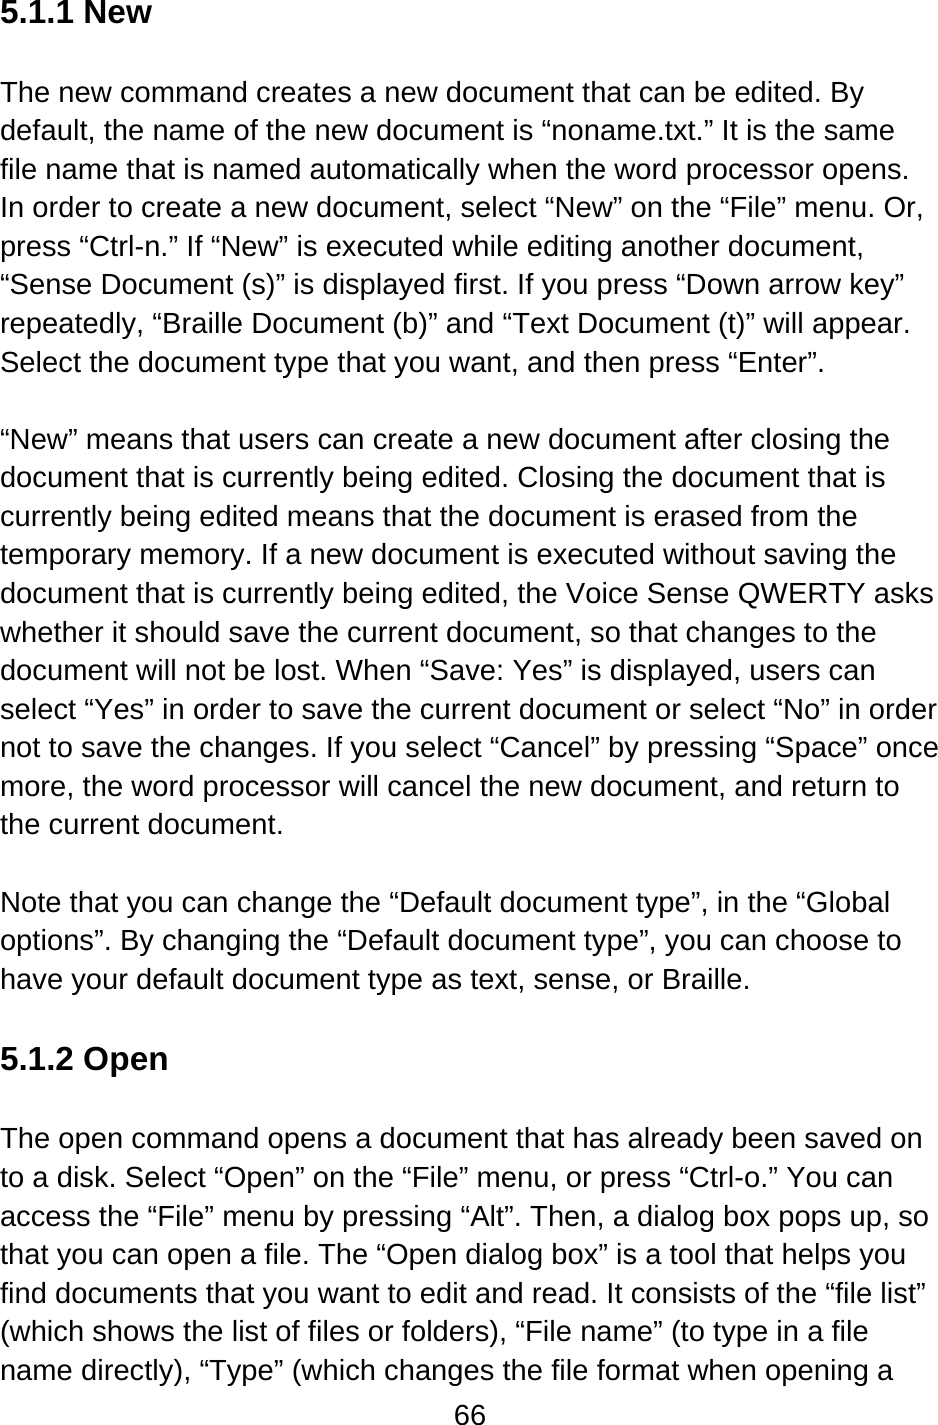 66  5.1.1 New  The new command creates a new document that can be edited. By default, the name of the new document is “noname.txt.” It is the same file name that is named automatically when the word processor opens. In order to create a new document, select “New” on the “File” menu. Or, press “Ctrl-n.” If “New” is executed while editing another document, “Sense Document (s)” is displayed first. If you press “Down arrow key” repeatedly, “Braille Document (b)” and “Text Document (t)” will appear. Select the document type that you want, and then press “Enter”.  “New” means that users can create a new document after closing the document that is currently being edited. Closing the document that is currently being edited means that the document is erased from the temporary memory. If a new document is executed without saving the document that is currently being edited, the Voice Sense QWERTY asks whether it should save the current document, so that changes to the document will not be lost. When “Save: Yes” is displayed, users can select “Yes” in order to save the current document or select “No” in order not to save the changes. If you select “Cancel” by pressing “Space” once more, the word processor will cancel the new document, and return to the current document.  Note that you can change the “Default document type”, in the “Global options”. By changing the “Default document type”, you can choose to have your default document type as text, sense, or Braille.   5.1.2 Open  The open command opens a document that has already been saved on to a disk. Select “Open” on the “File” menu, or press “Ctrl-o.” You can access the “File” menu by pressing “Alt”. Then, a dialog box pops up, so that you can open a file. The “Open dialog box” is a tool that helps you find documents that you want to edit and read. It consists of the “file list” (which shows the list of files or folders), “File name” (to type in a file name directly), “Type” (which changes the file format when opening a 